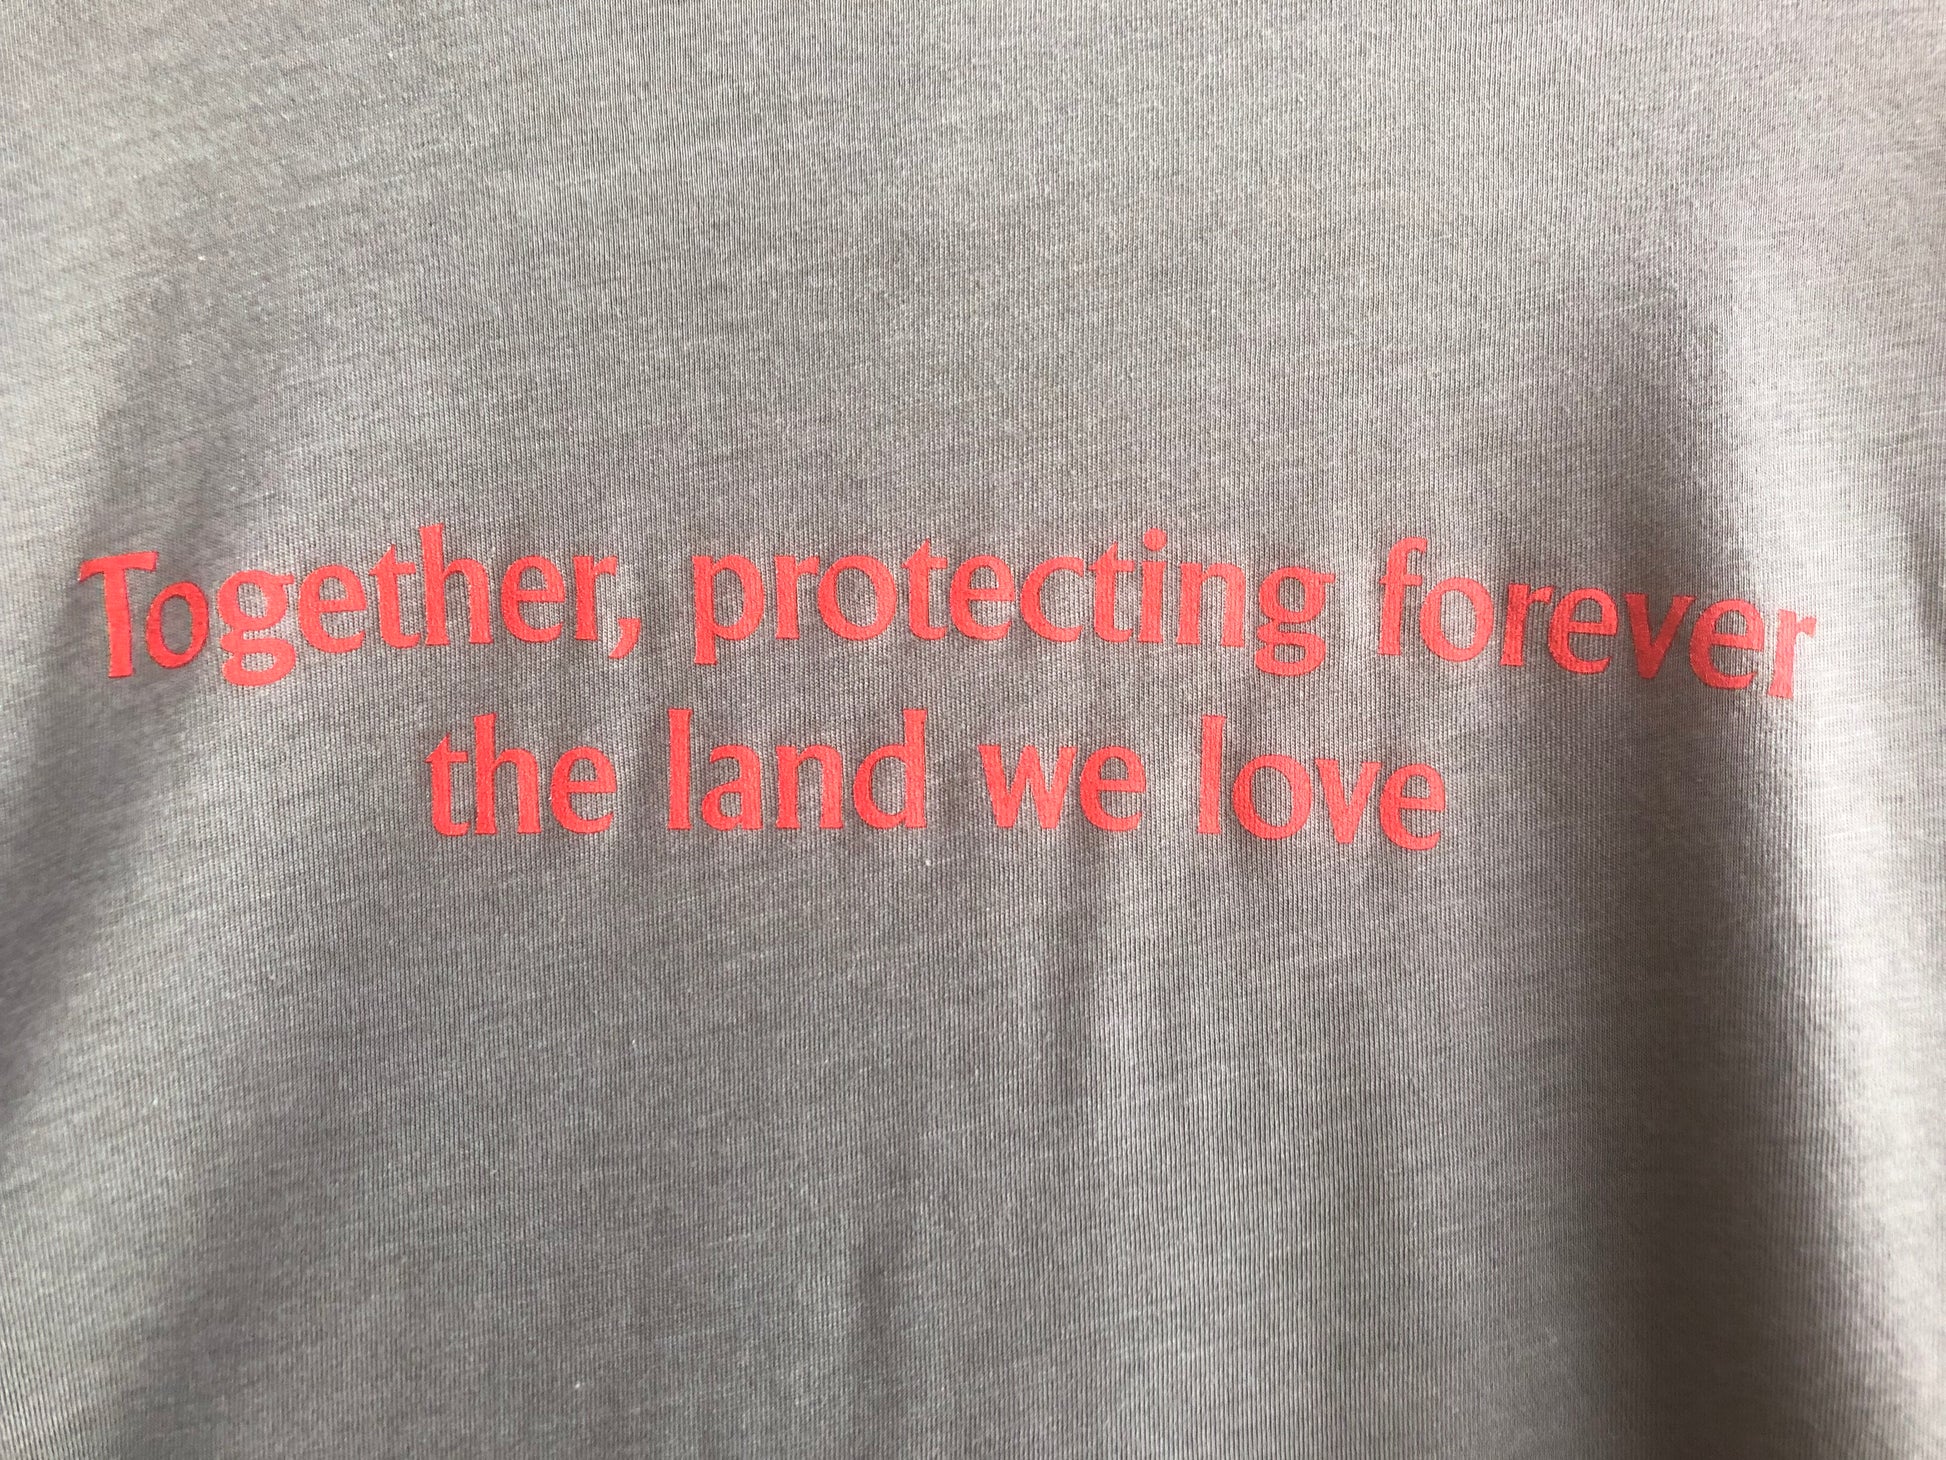 The back of the long sleeve gray shirt, with text that reads, "together, protecting forever the land we love."